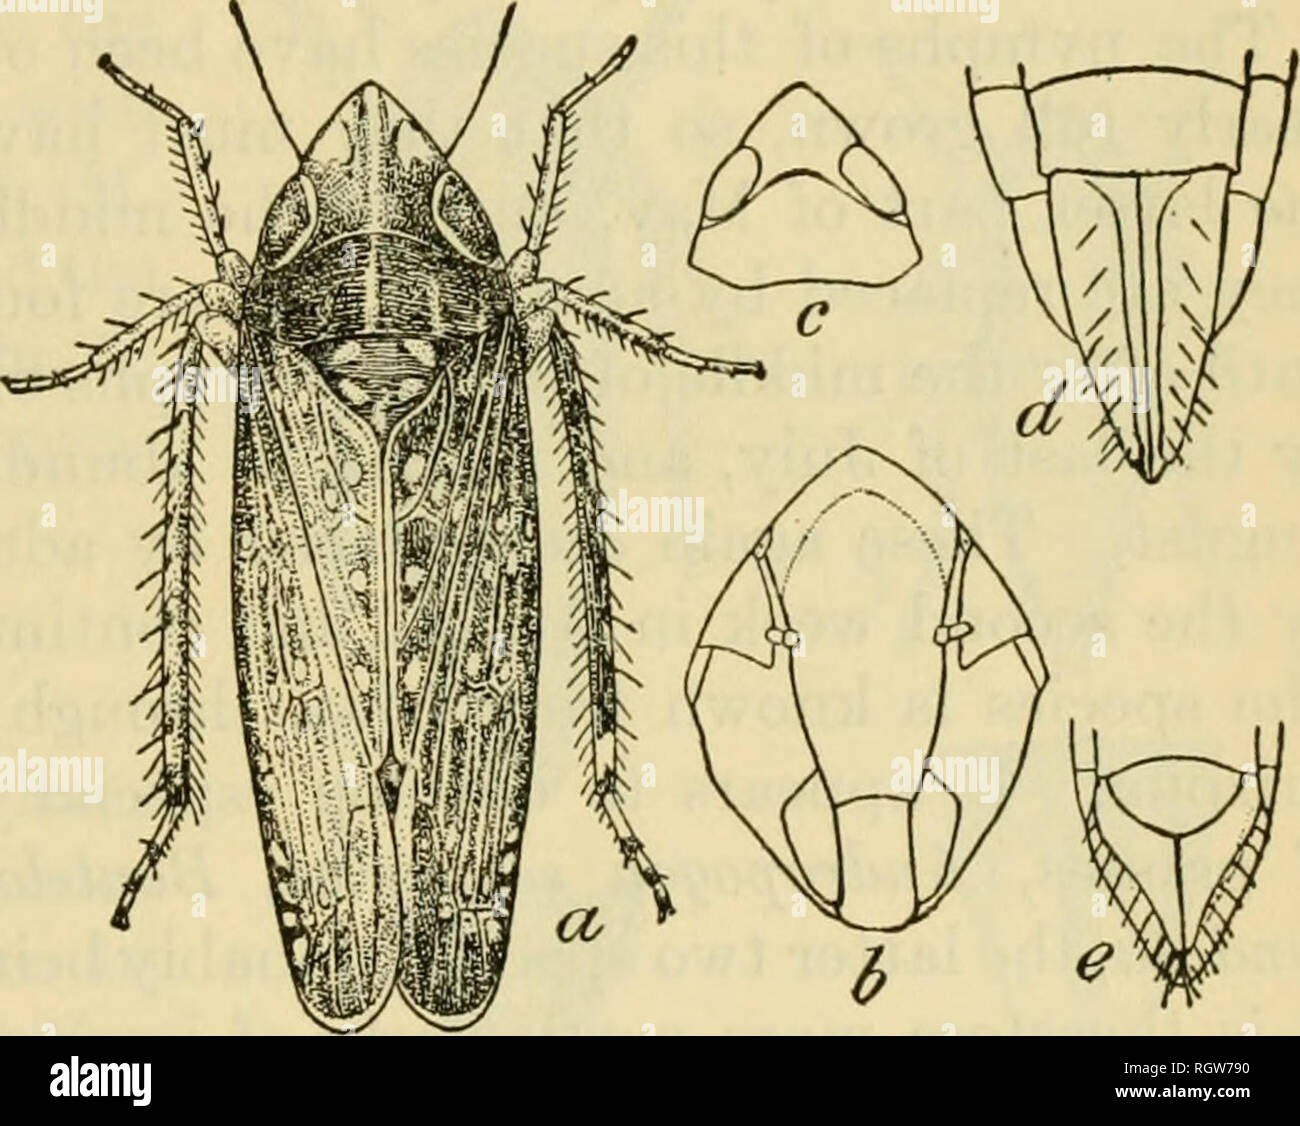 . Bulletin. Insects; Insect pests; Entomology; Insects; Insect pests; Entomology. THE YELLOW-FACED LEAFHOPPER. 11 grasses or on low vegetation and appear to be general feeders. They have not been determined as restricted to any single kind of grass as a host plant. The Yellow-faced Leafhopper. (Platymetopius front alls Van D.) The yellow-faced leafhopper (Platymetopius frontalis Van D.) is a much darker species than the acutus, ranging from dark brown to distinctly black with a broad border and lemon-yellow face. The forewings are marked with numerous round, white spots. In size it is somewhat Stock Photo